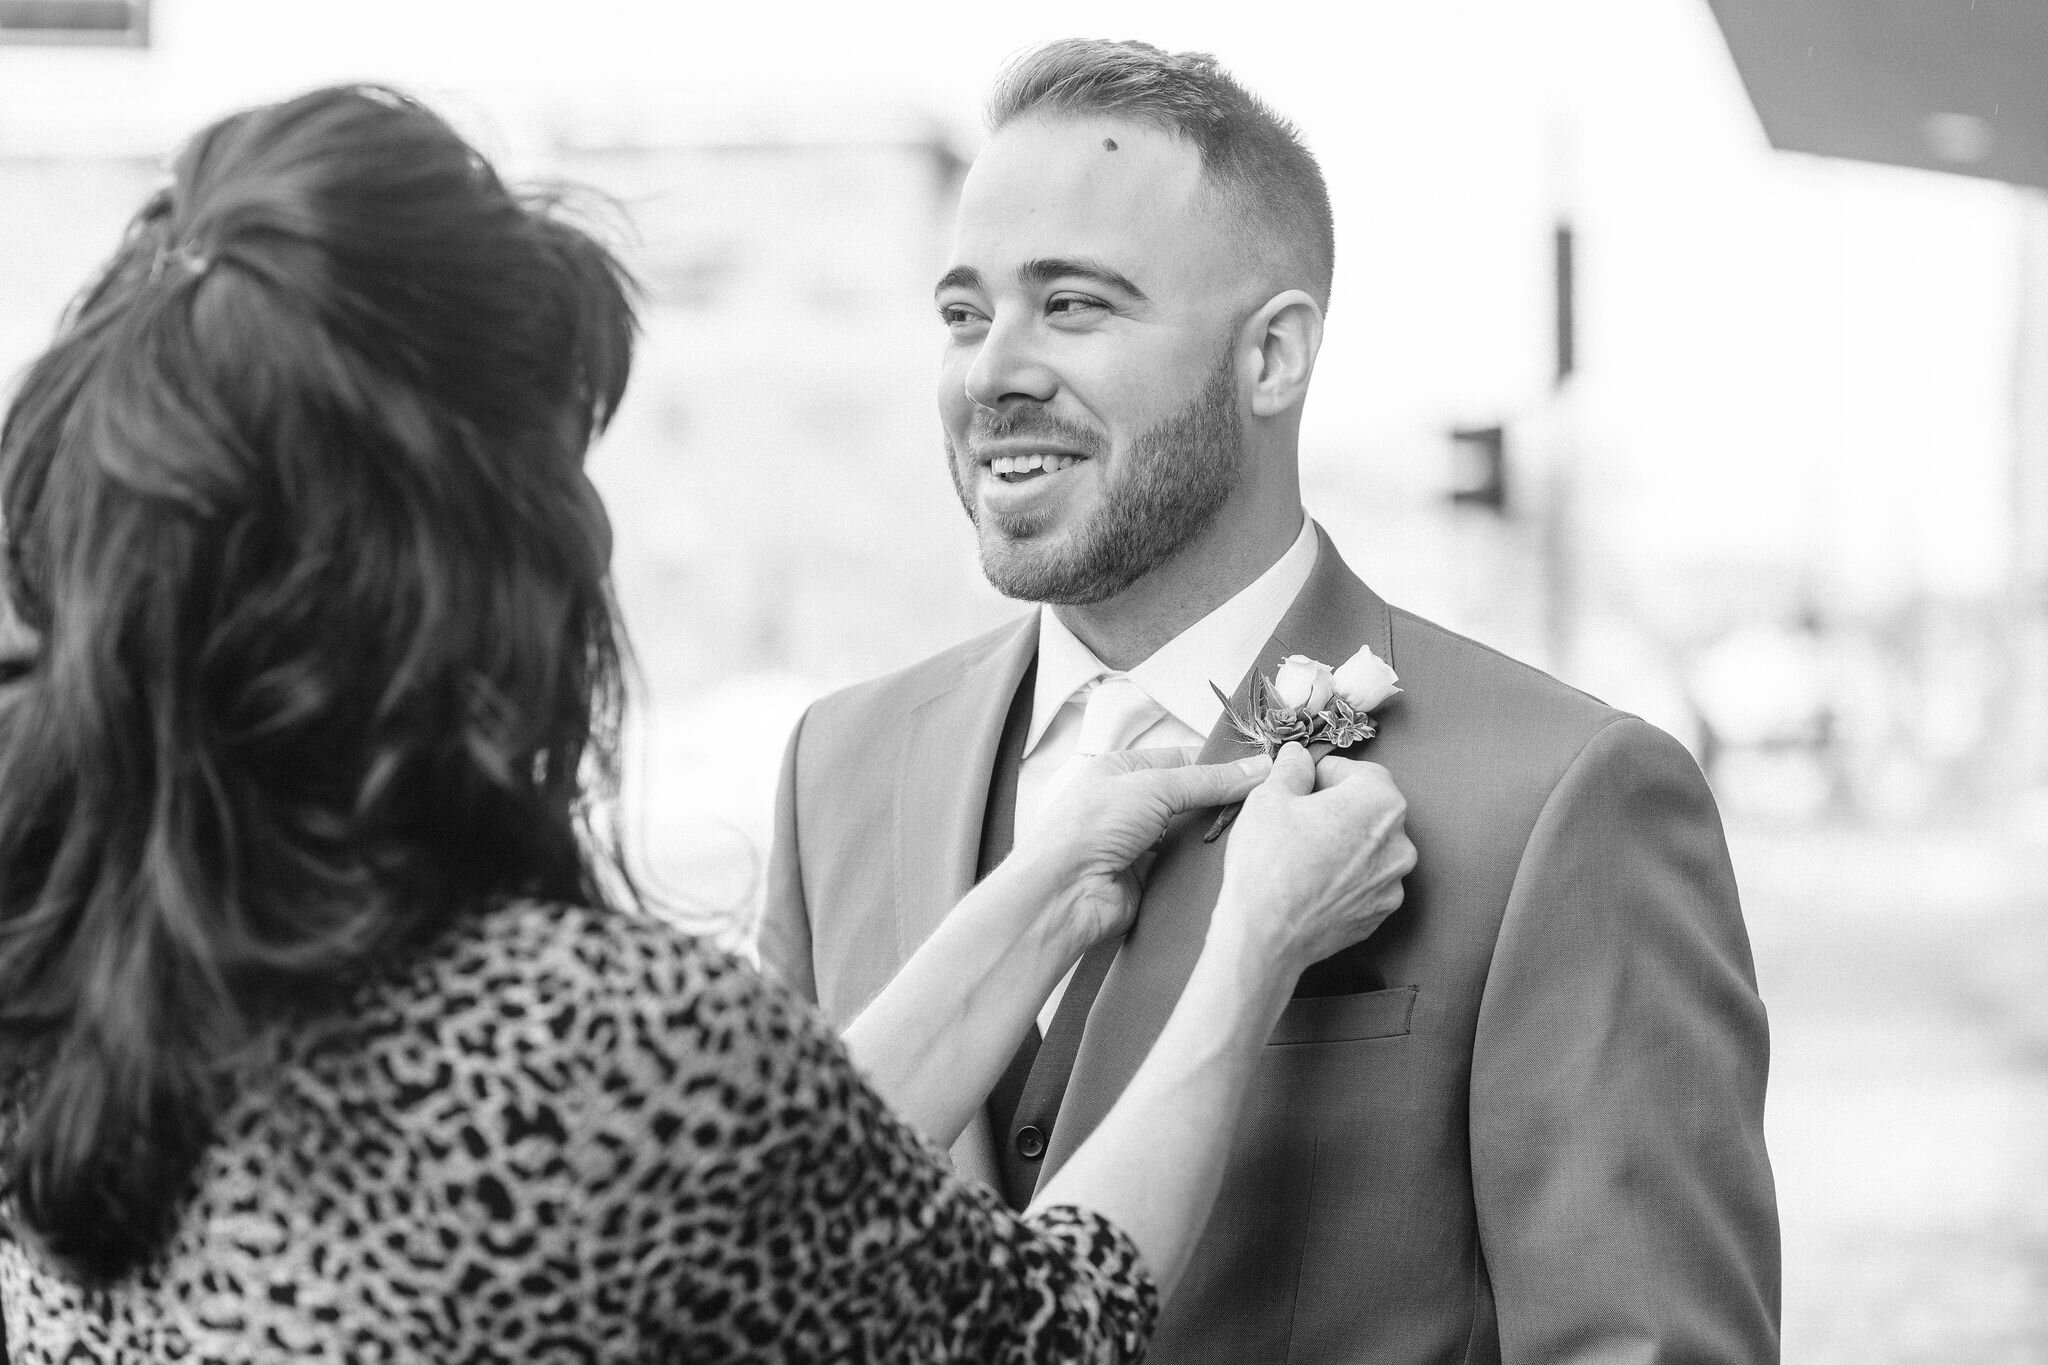 Groom getting his boutonniere pinned on